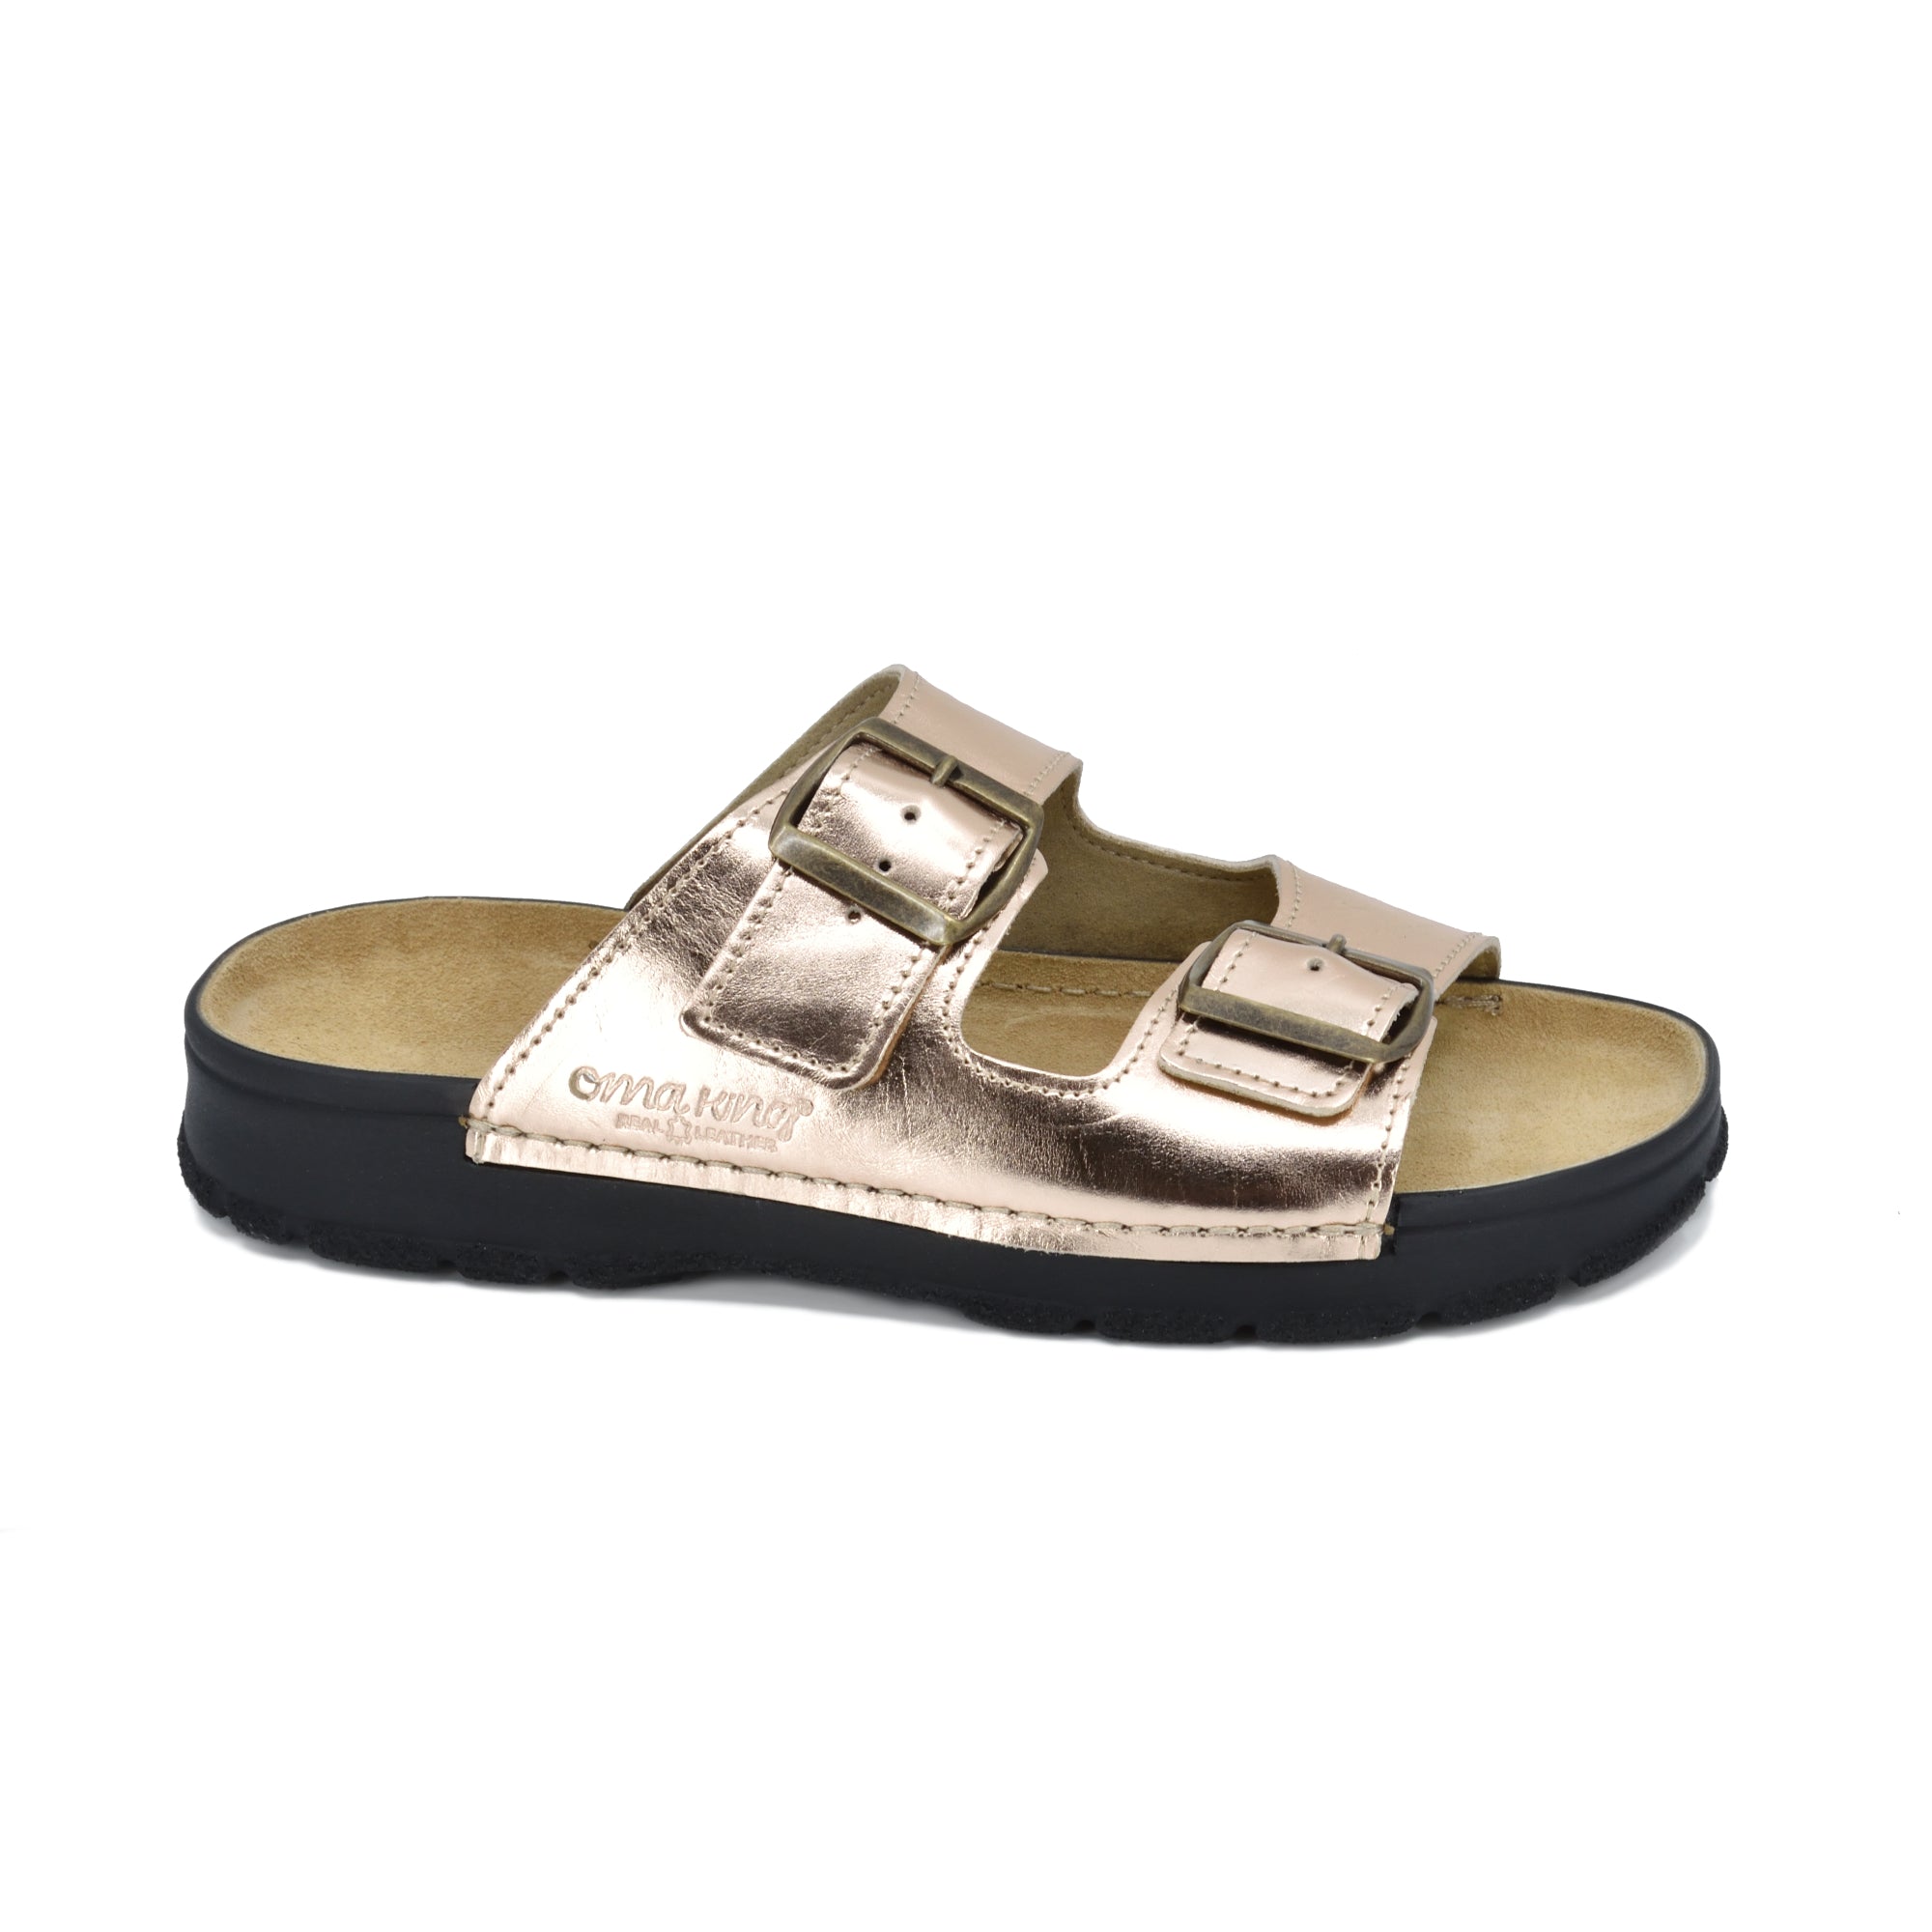 Women's leather sandals Lind, rose gold